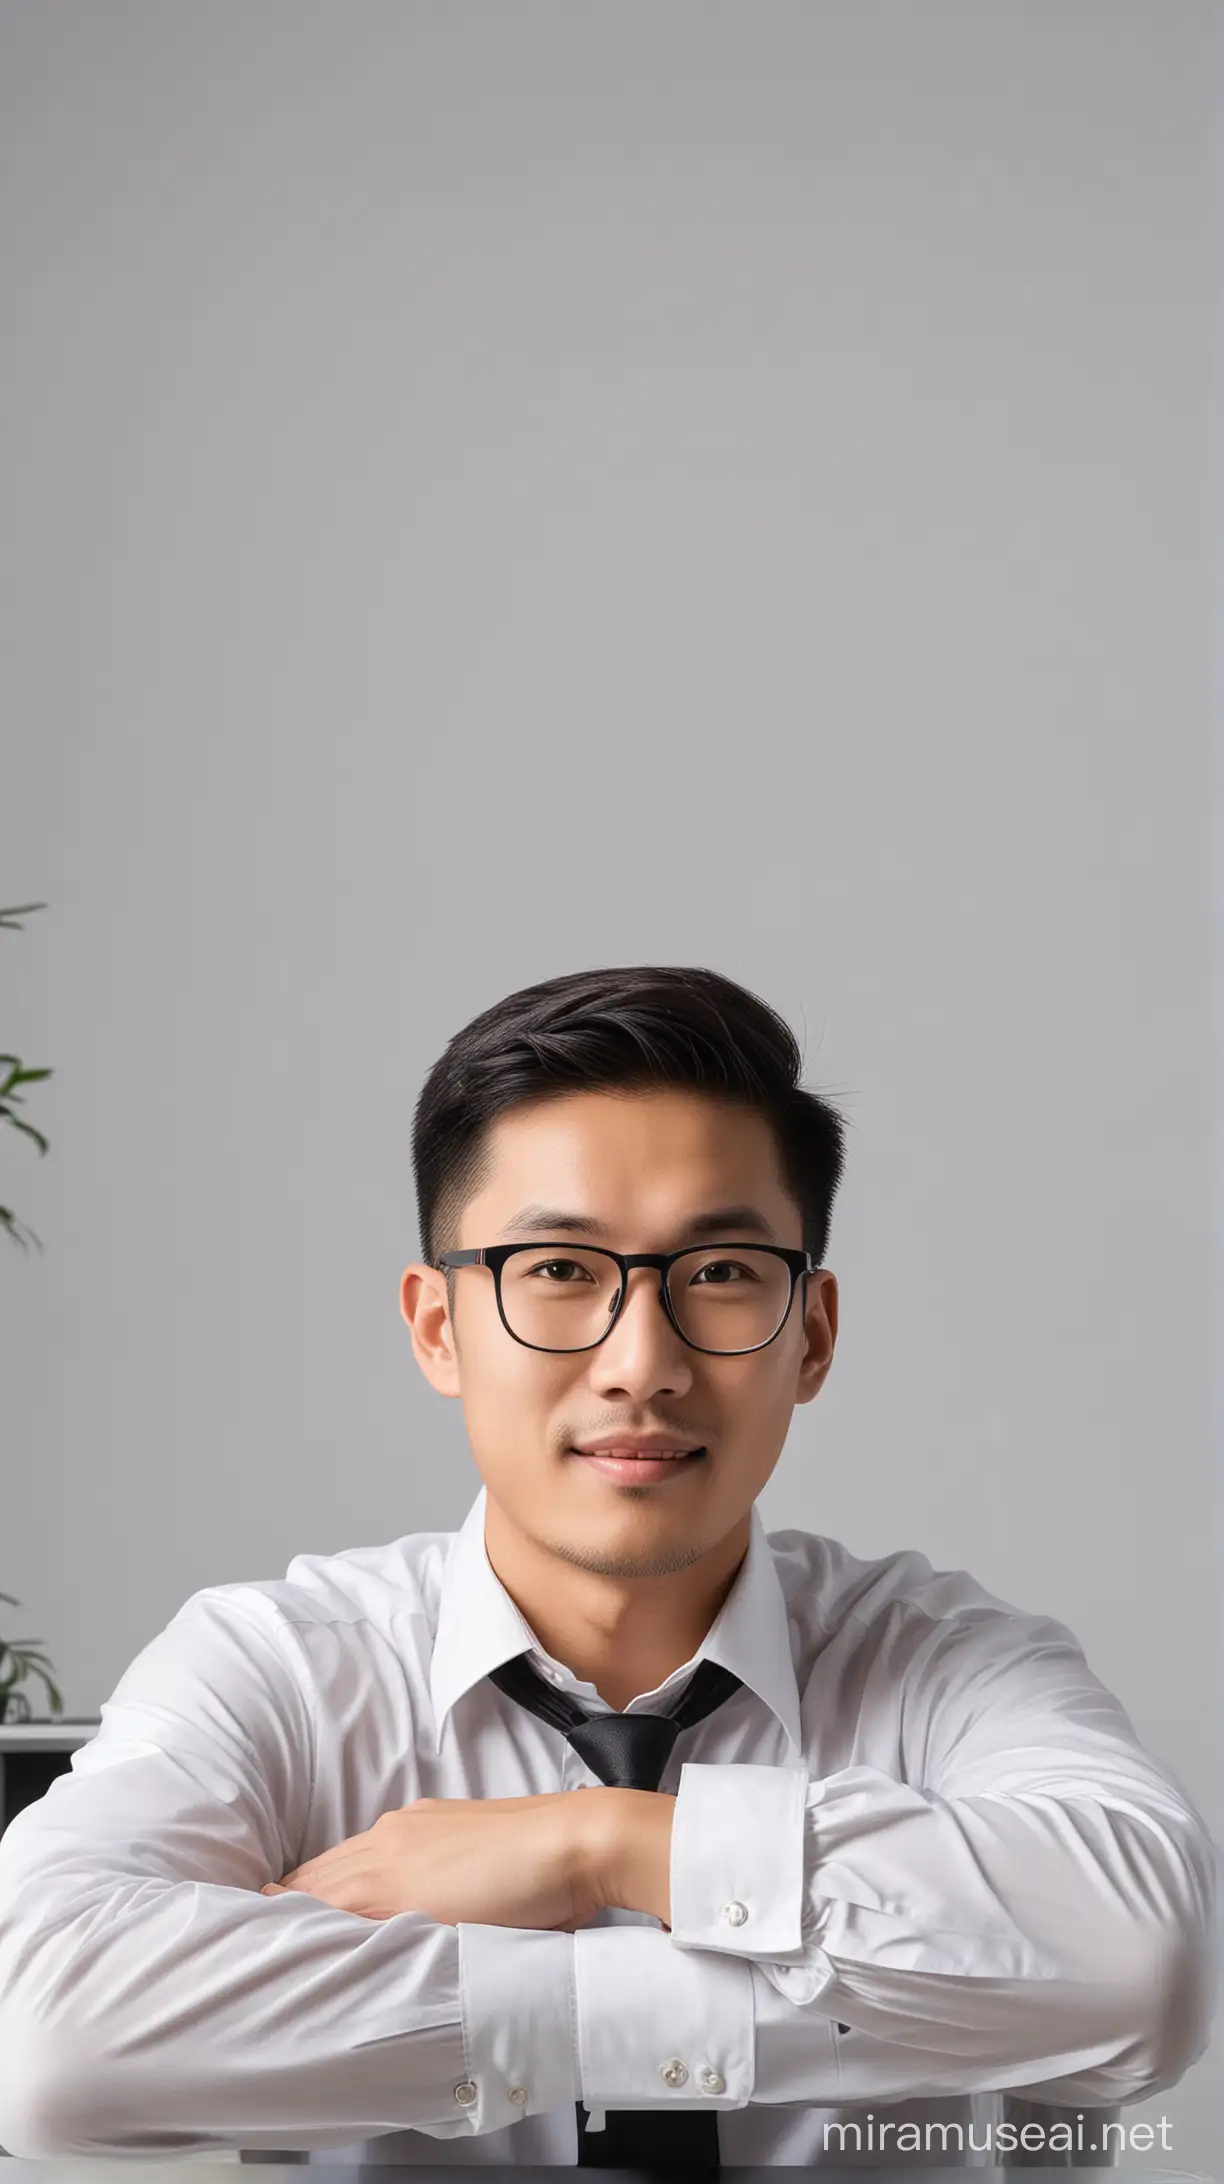 young man, asian, teacher, background in office
